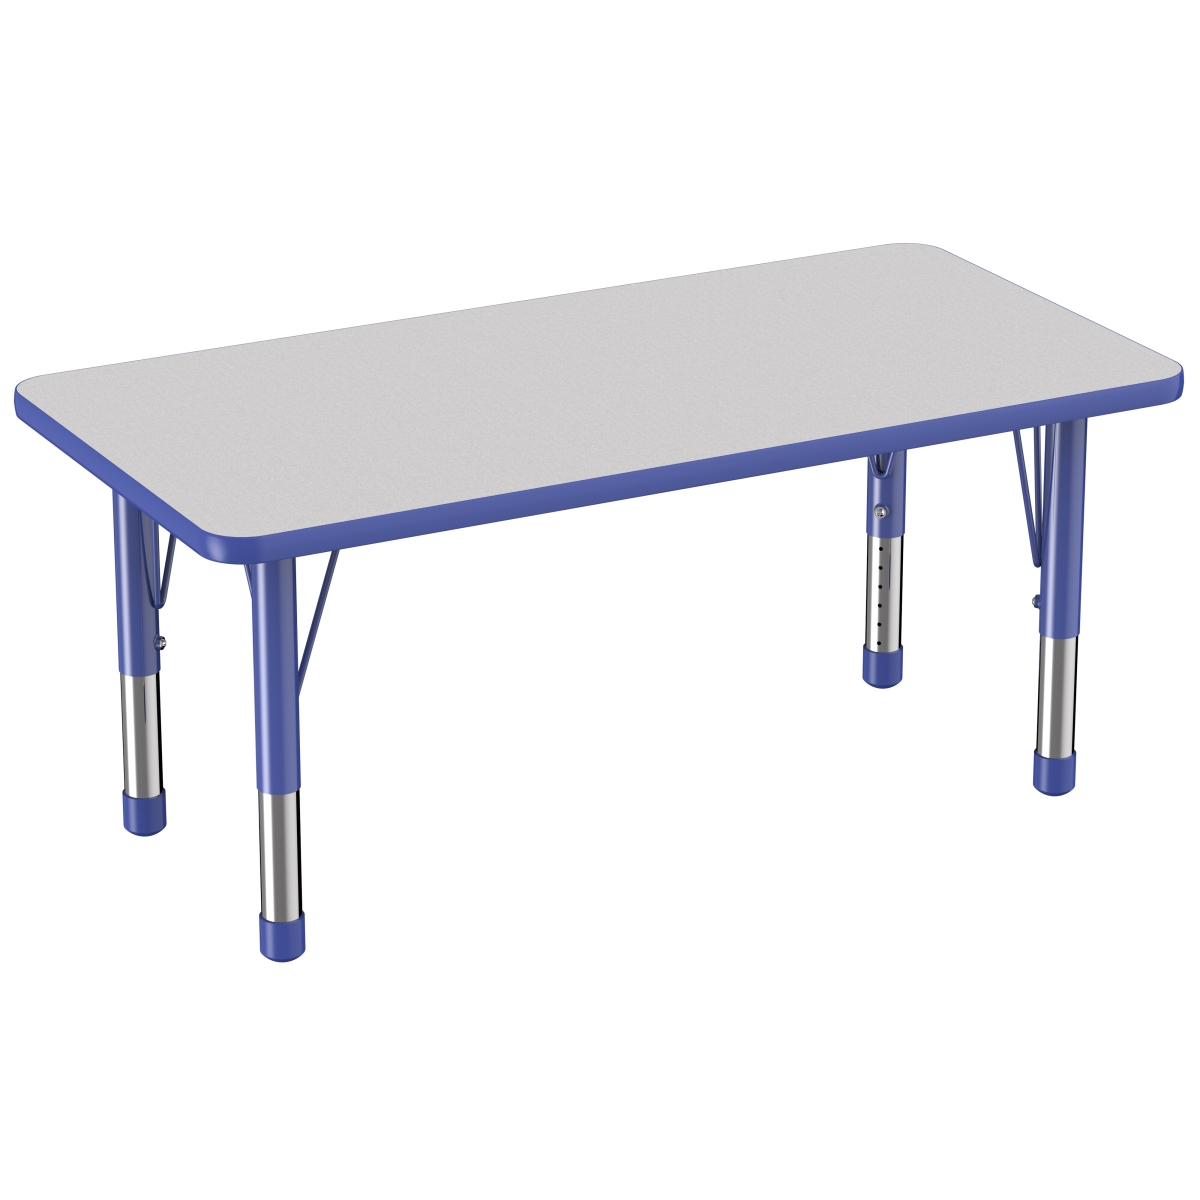 10009-gybl 24 X 48 In. Rectangle T-mold Adjustable Activity Table With Chunky Leg - Grey & Blue